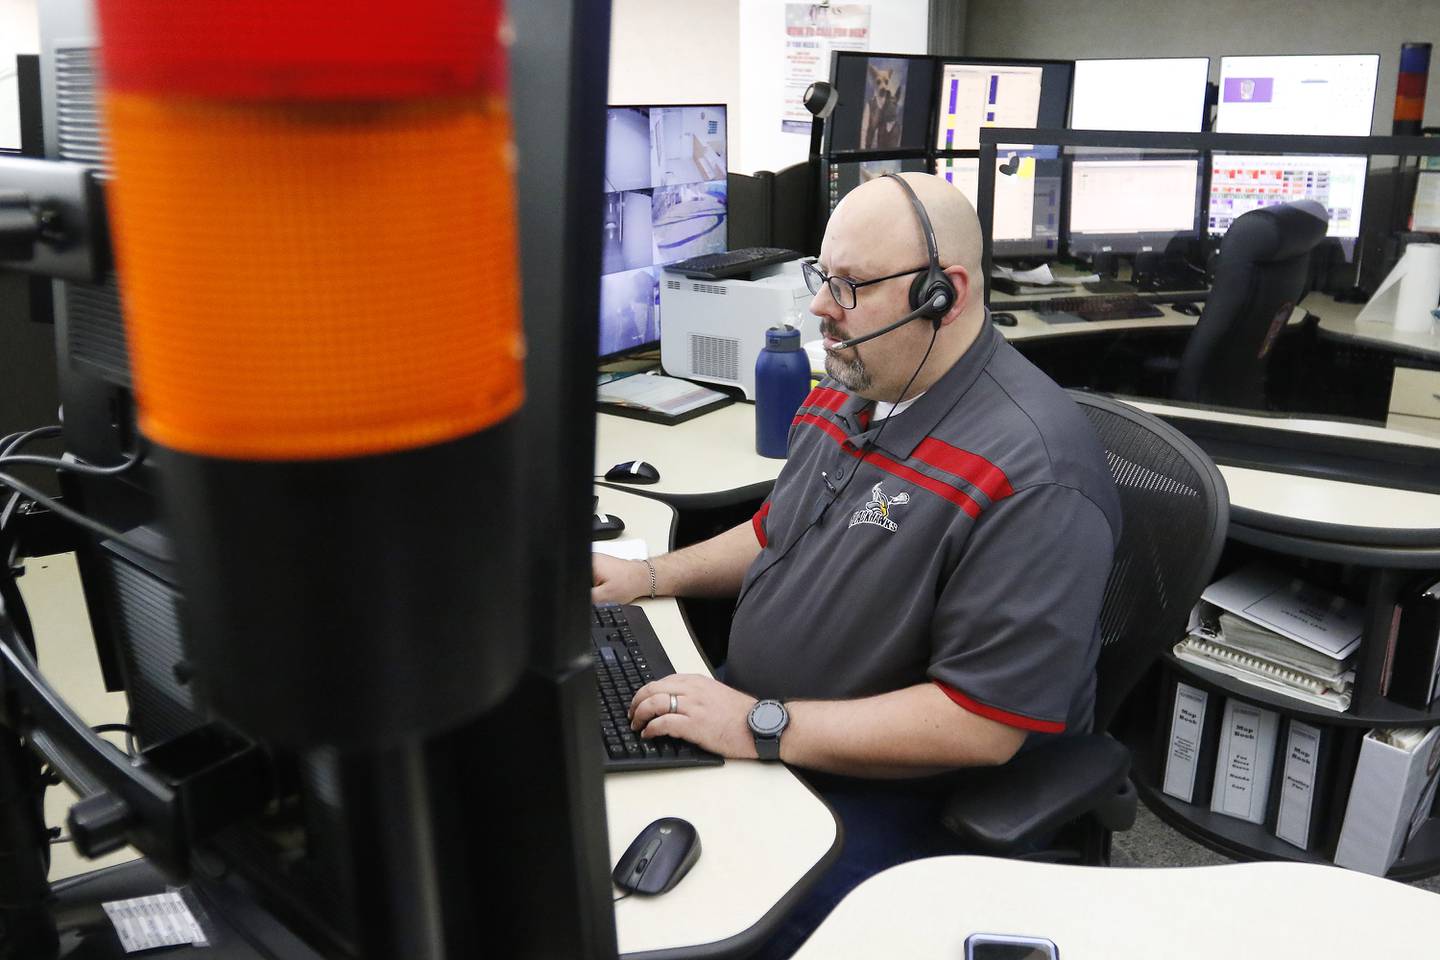 SEECOM telecommunicator Matt Gruenwald works the phones and computer systems that connect 911 calls to first responders on Wednesday, Dec. 22, 2021, at Aaron T. Shepley City Hall in Crystal Lake.